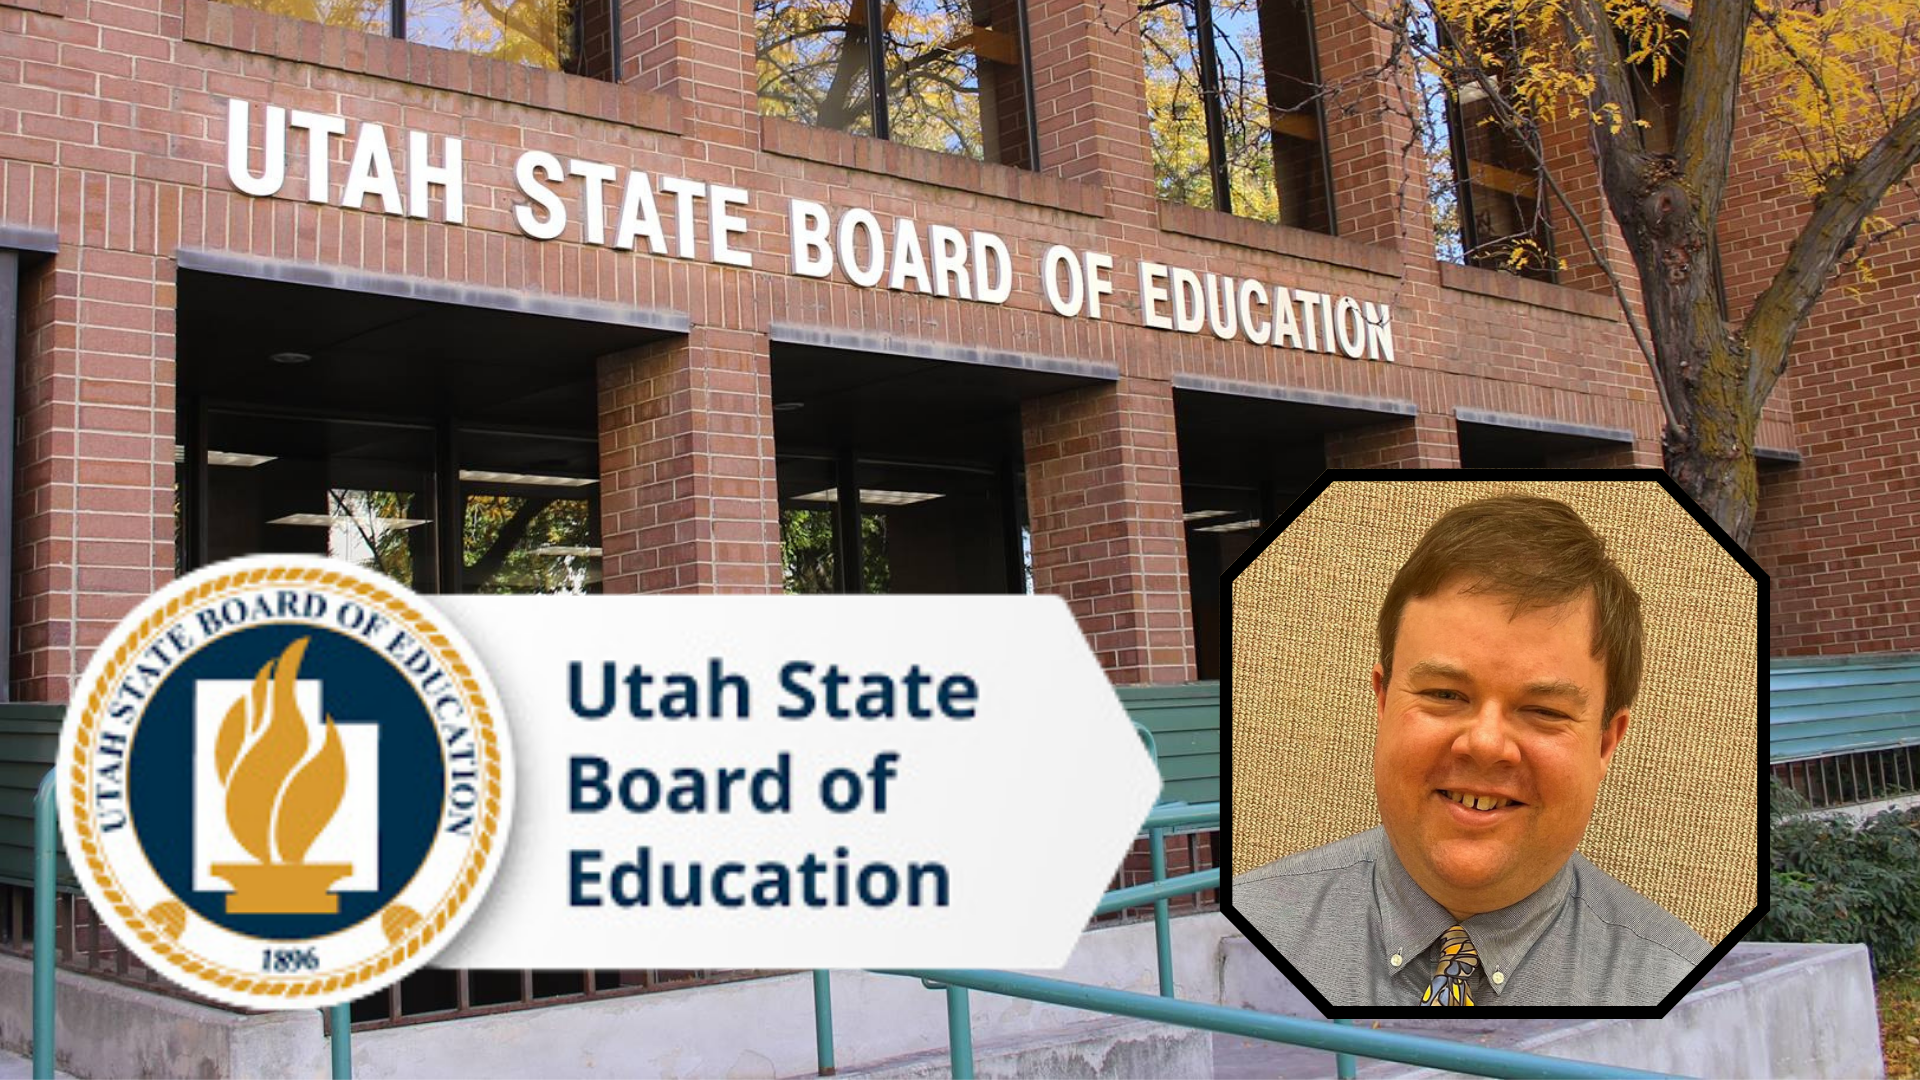 Featured image for “ARO Spotlight: Utah State Board of Education”